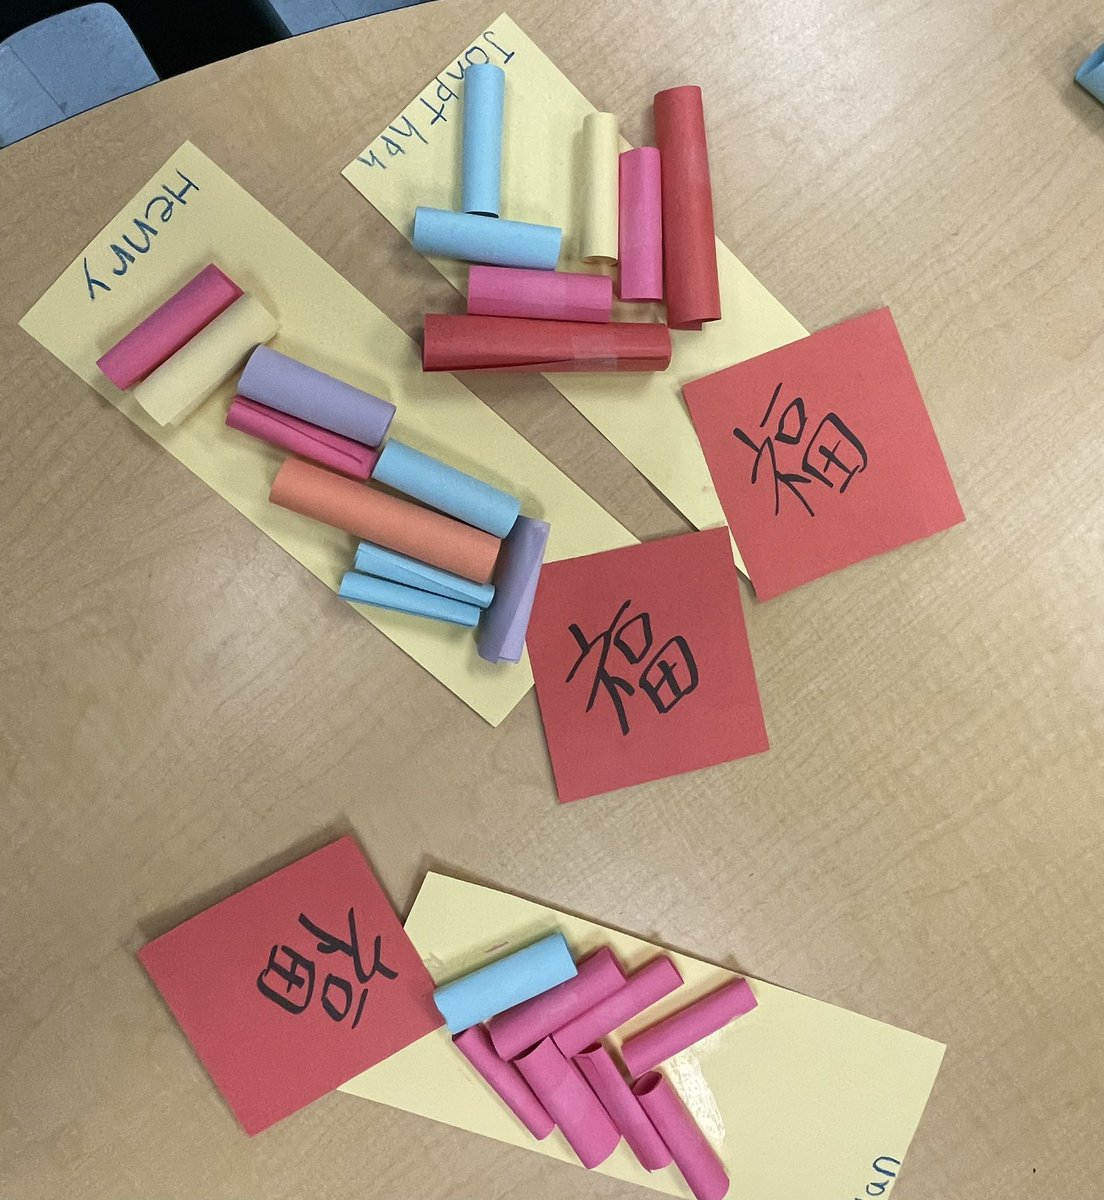 Our Kindergarteners learned to make firecrackers for the #LunarNewYear to ward off “Nian”, the legendary monster that comes to destroy fields, crops, animals and terrorize people. The word 福 displayed upside down signifies luck is coming. @yrdsbinclusion @YRDSBArts @yrdsb